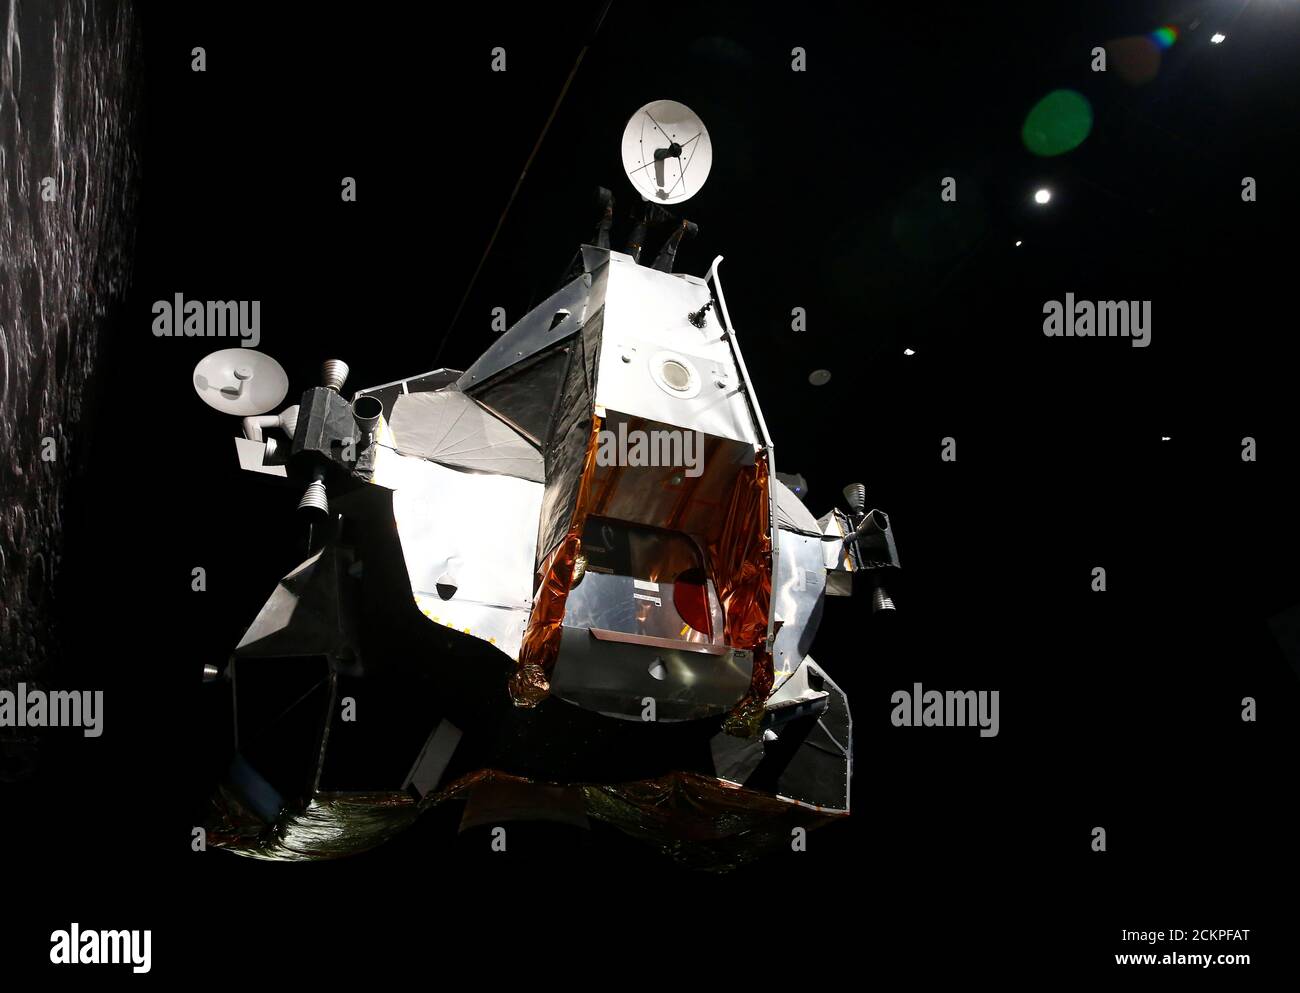 A full-size mockup of the Apollo lunar module, which carried astronauts from orbit to the Moon's surface, is pictured at the 'Destination Moon: The Apollo 11 Mission' exhibit at the Museum of Flight in Seattle, Washington, U.S., July 16, 2019.   REUTERS/Lindsey Wasson Stock Photo